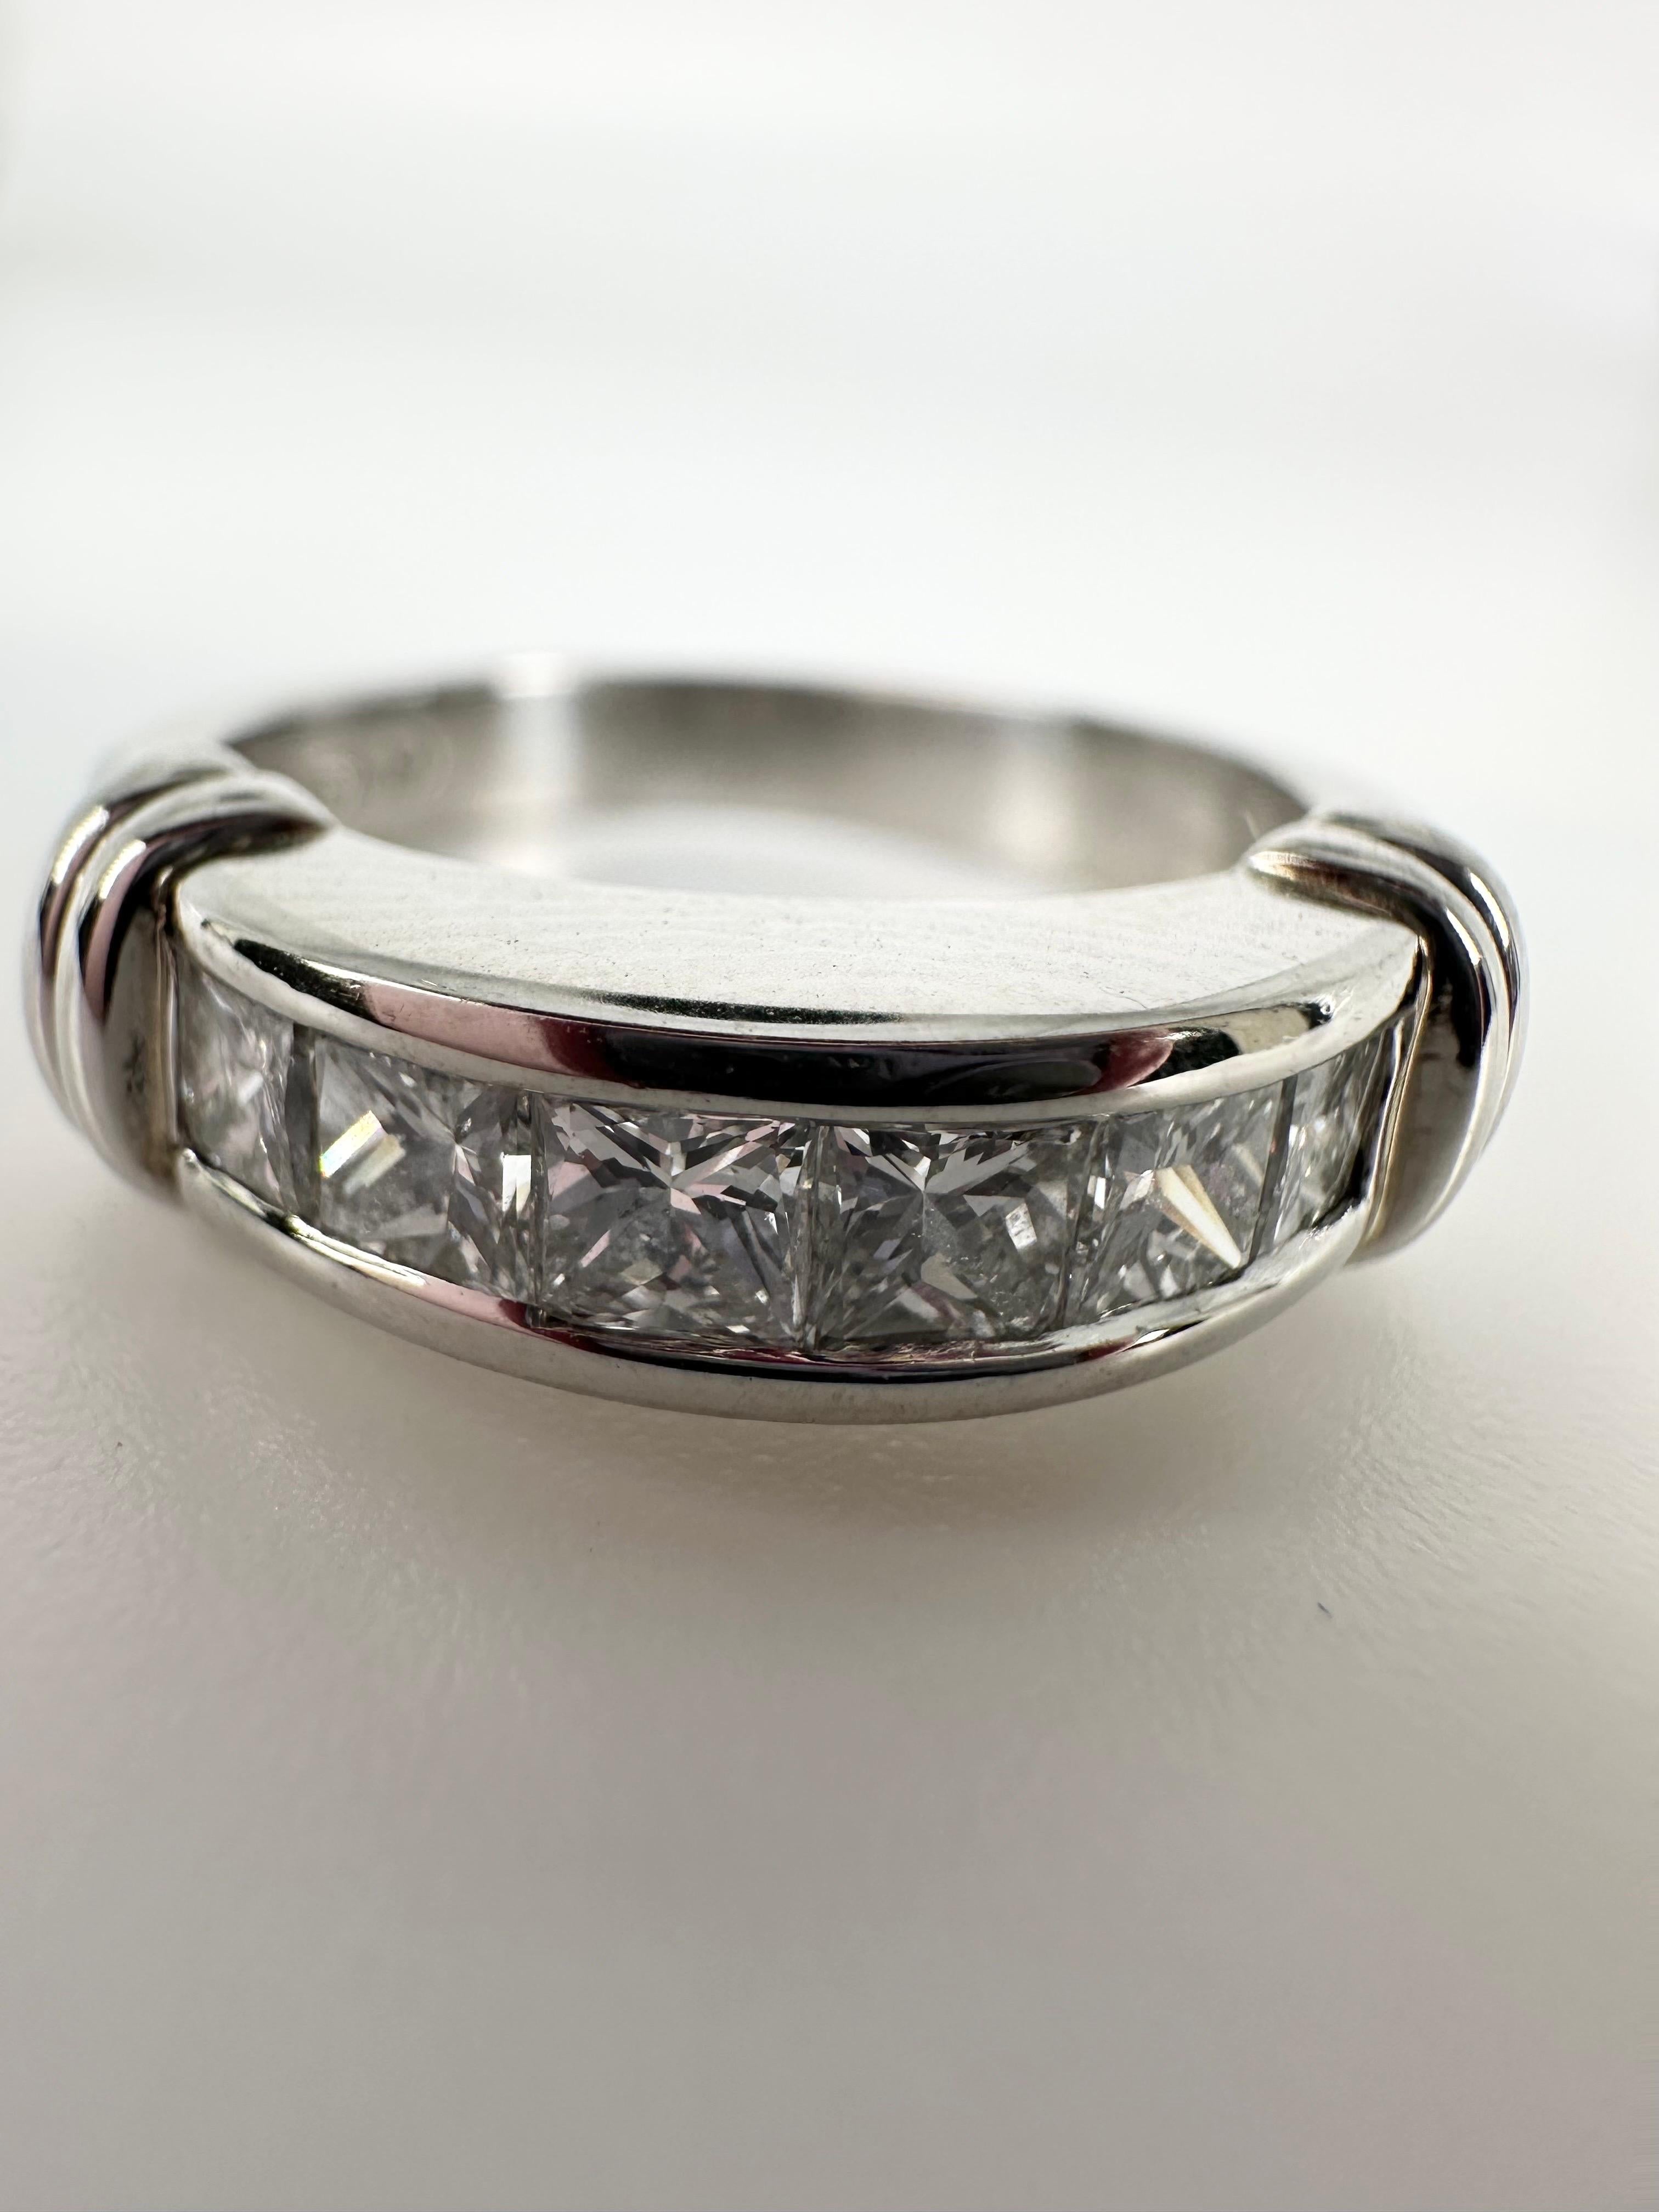 Princess Cut Diamond Wedding Band Made in Platinum 1.02 Carats In New Condition For Sale In Jupiter, FL